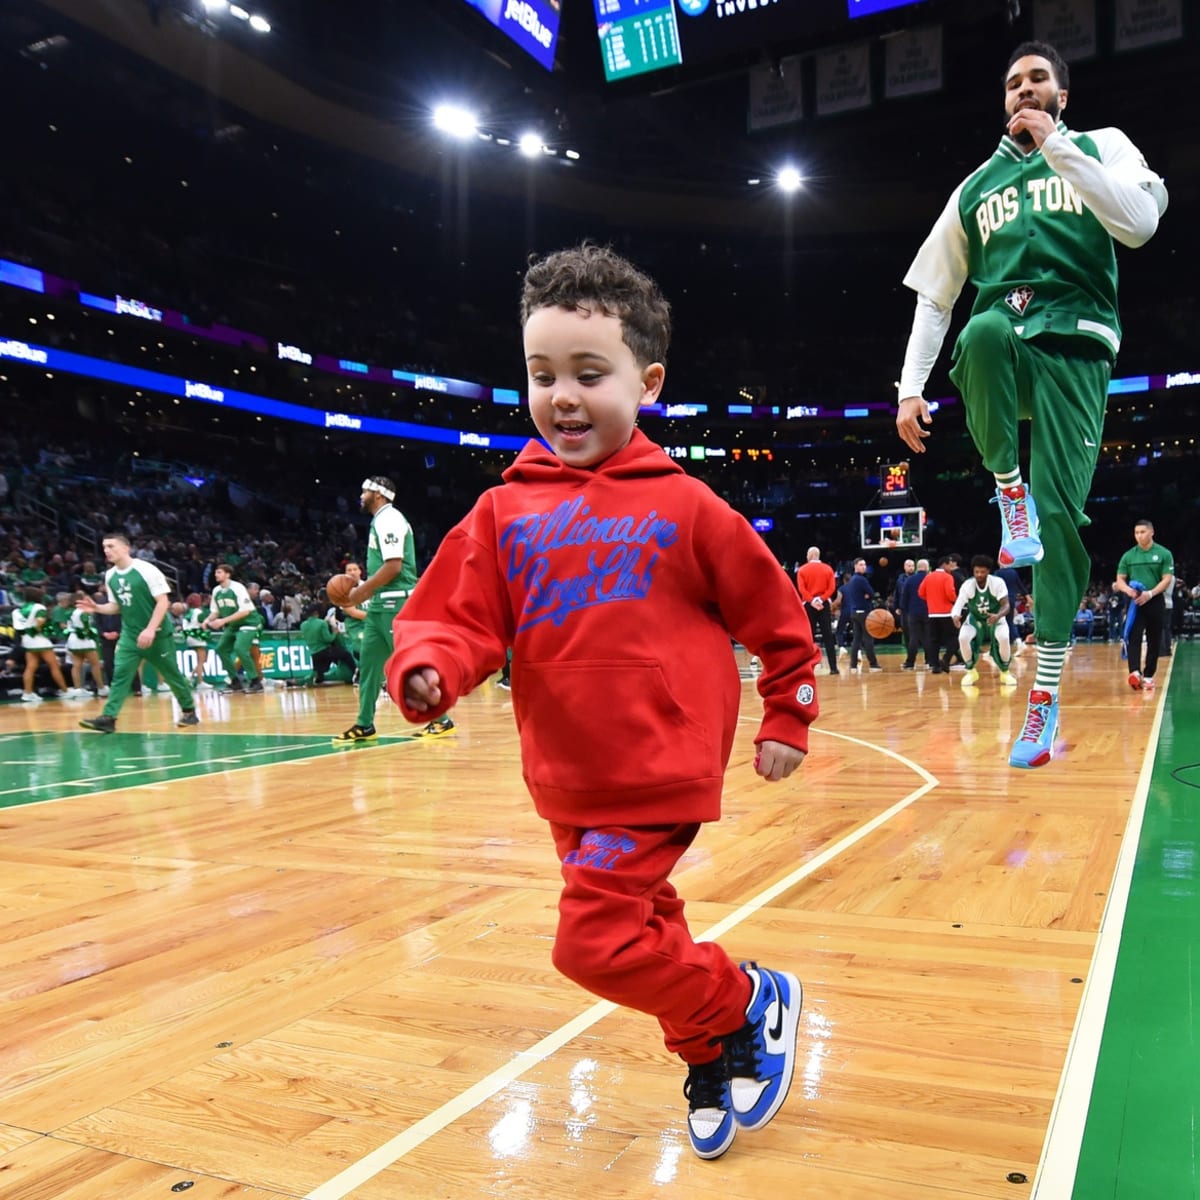 The incredible relationship between Jayson Tatum and his son Deuce